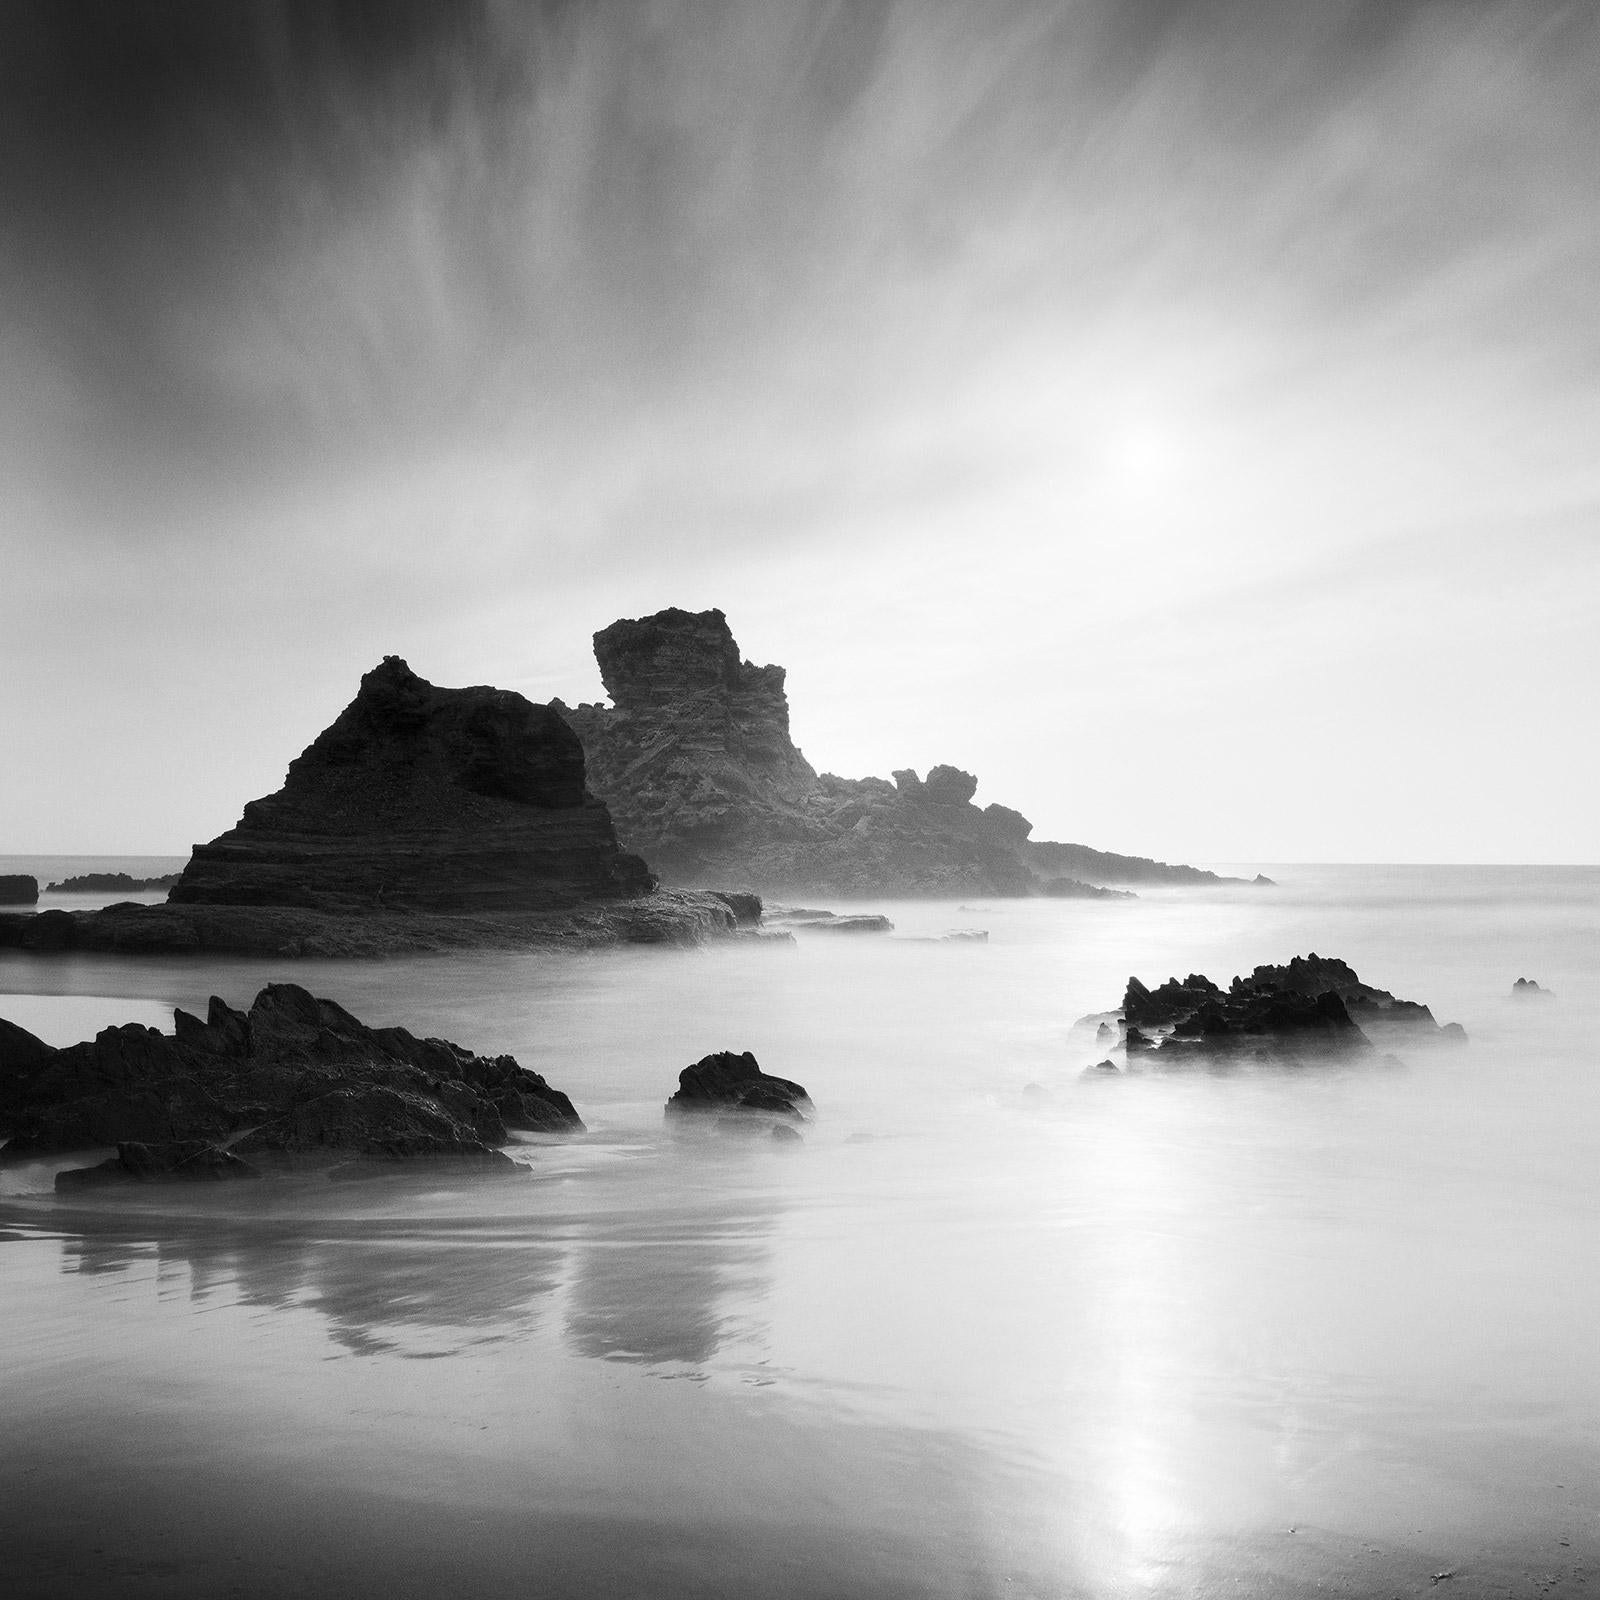 Stranded In Paradise, Beach, Spain, black and white art landscape photography